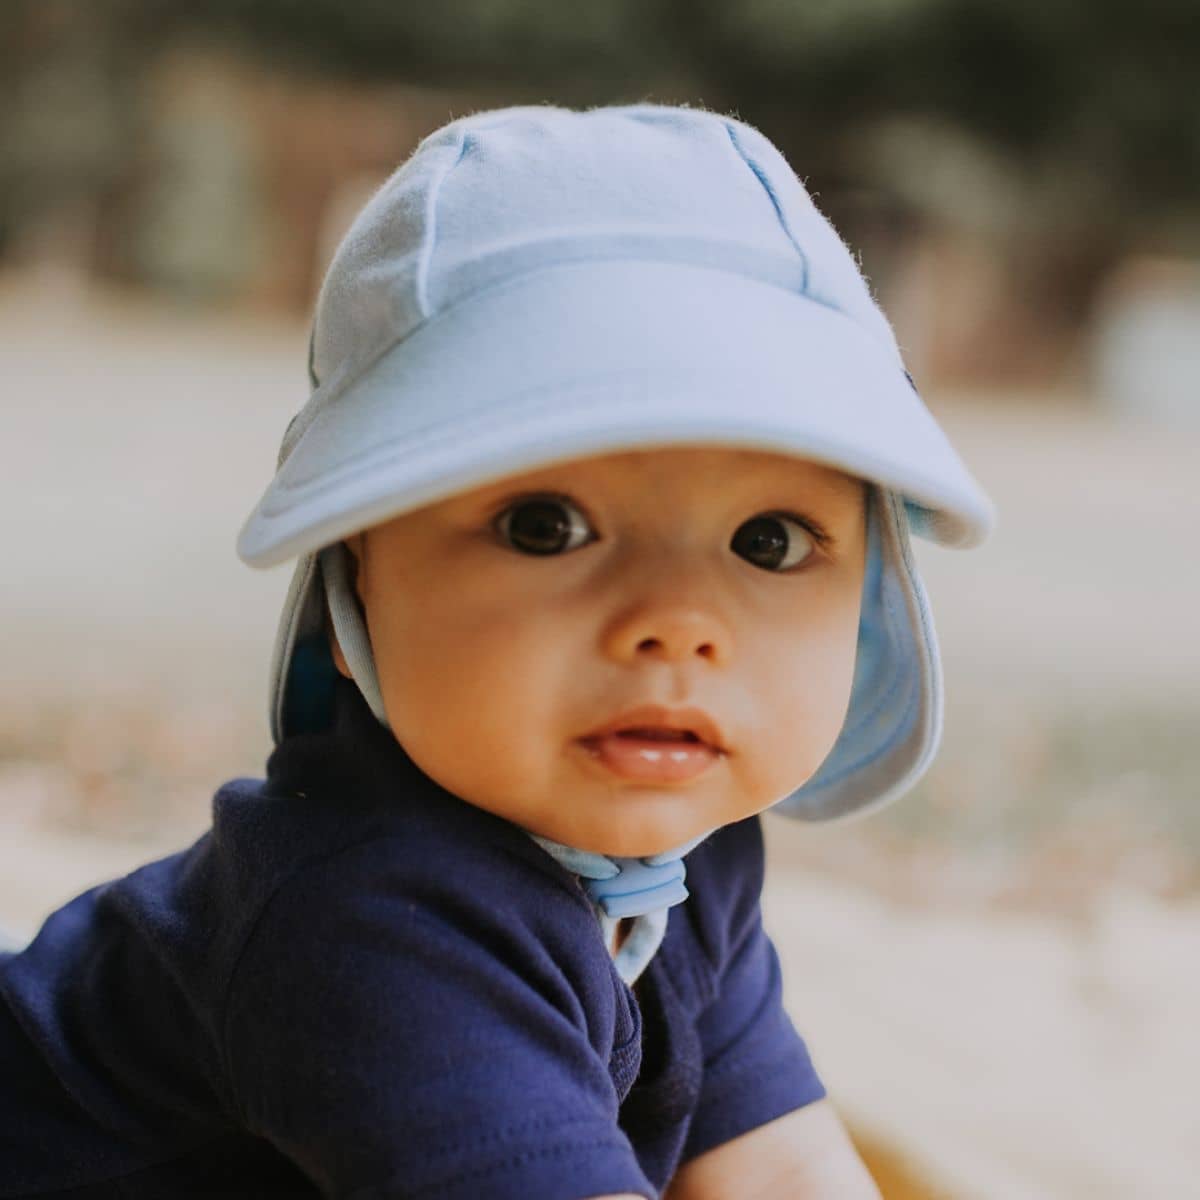 Bedhead Legionnaire Hat with Strap - Baby Blue